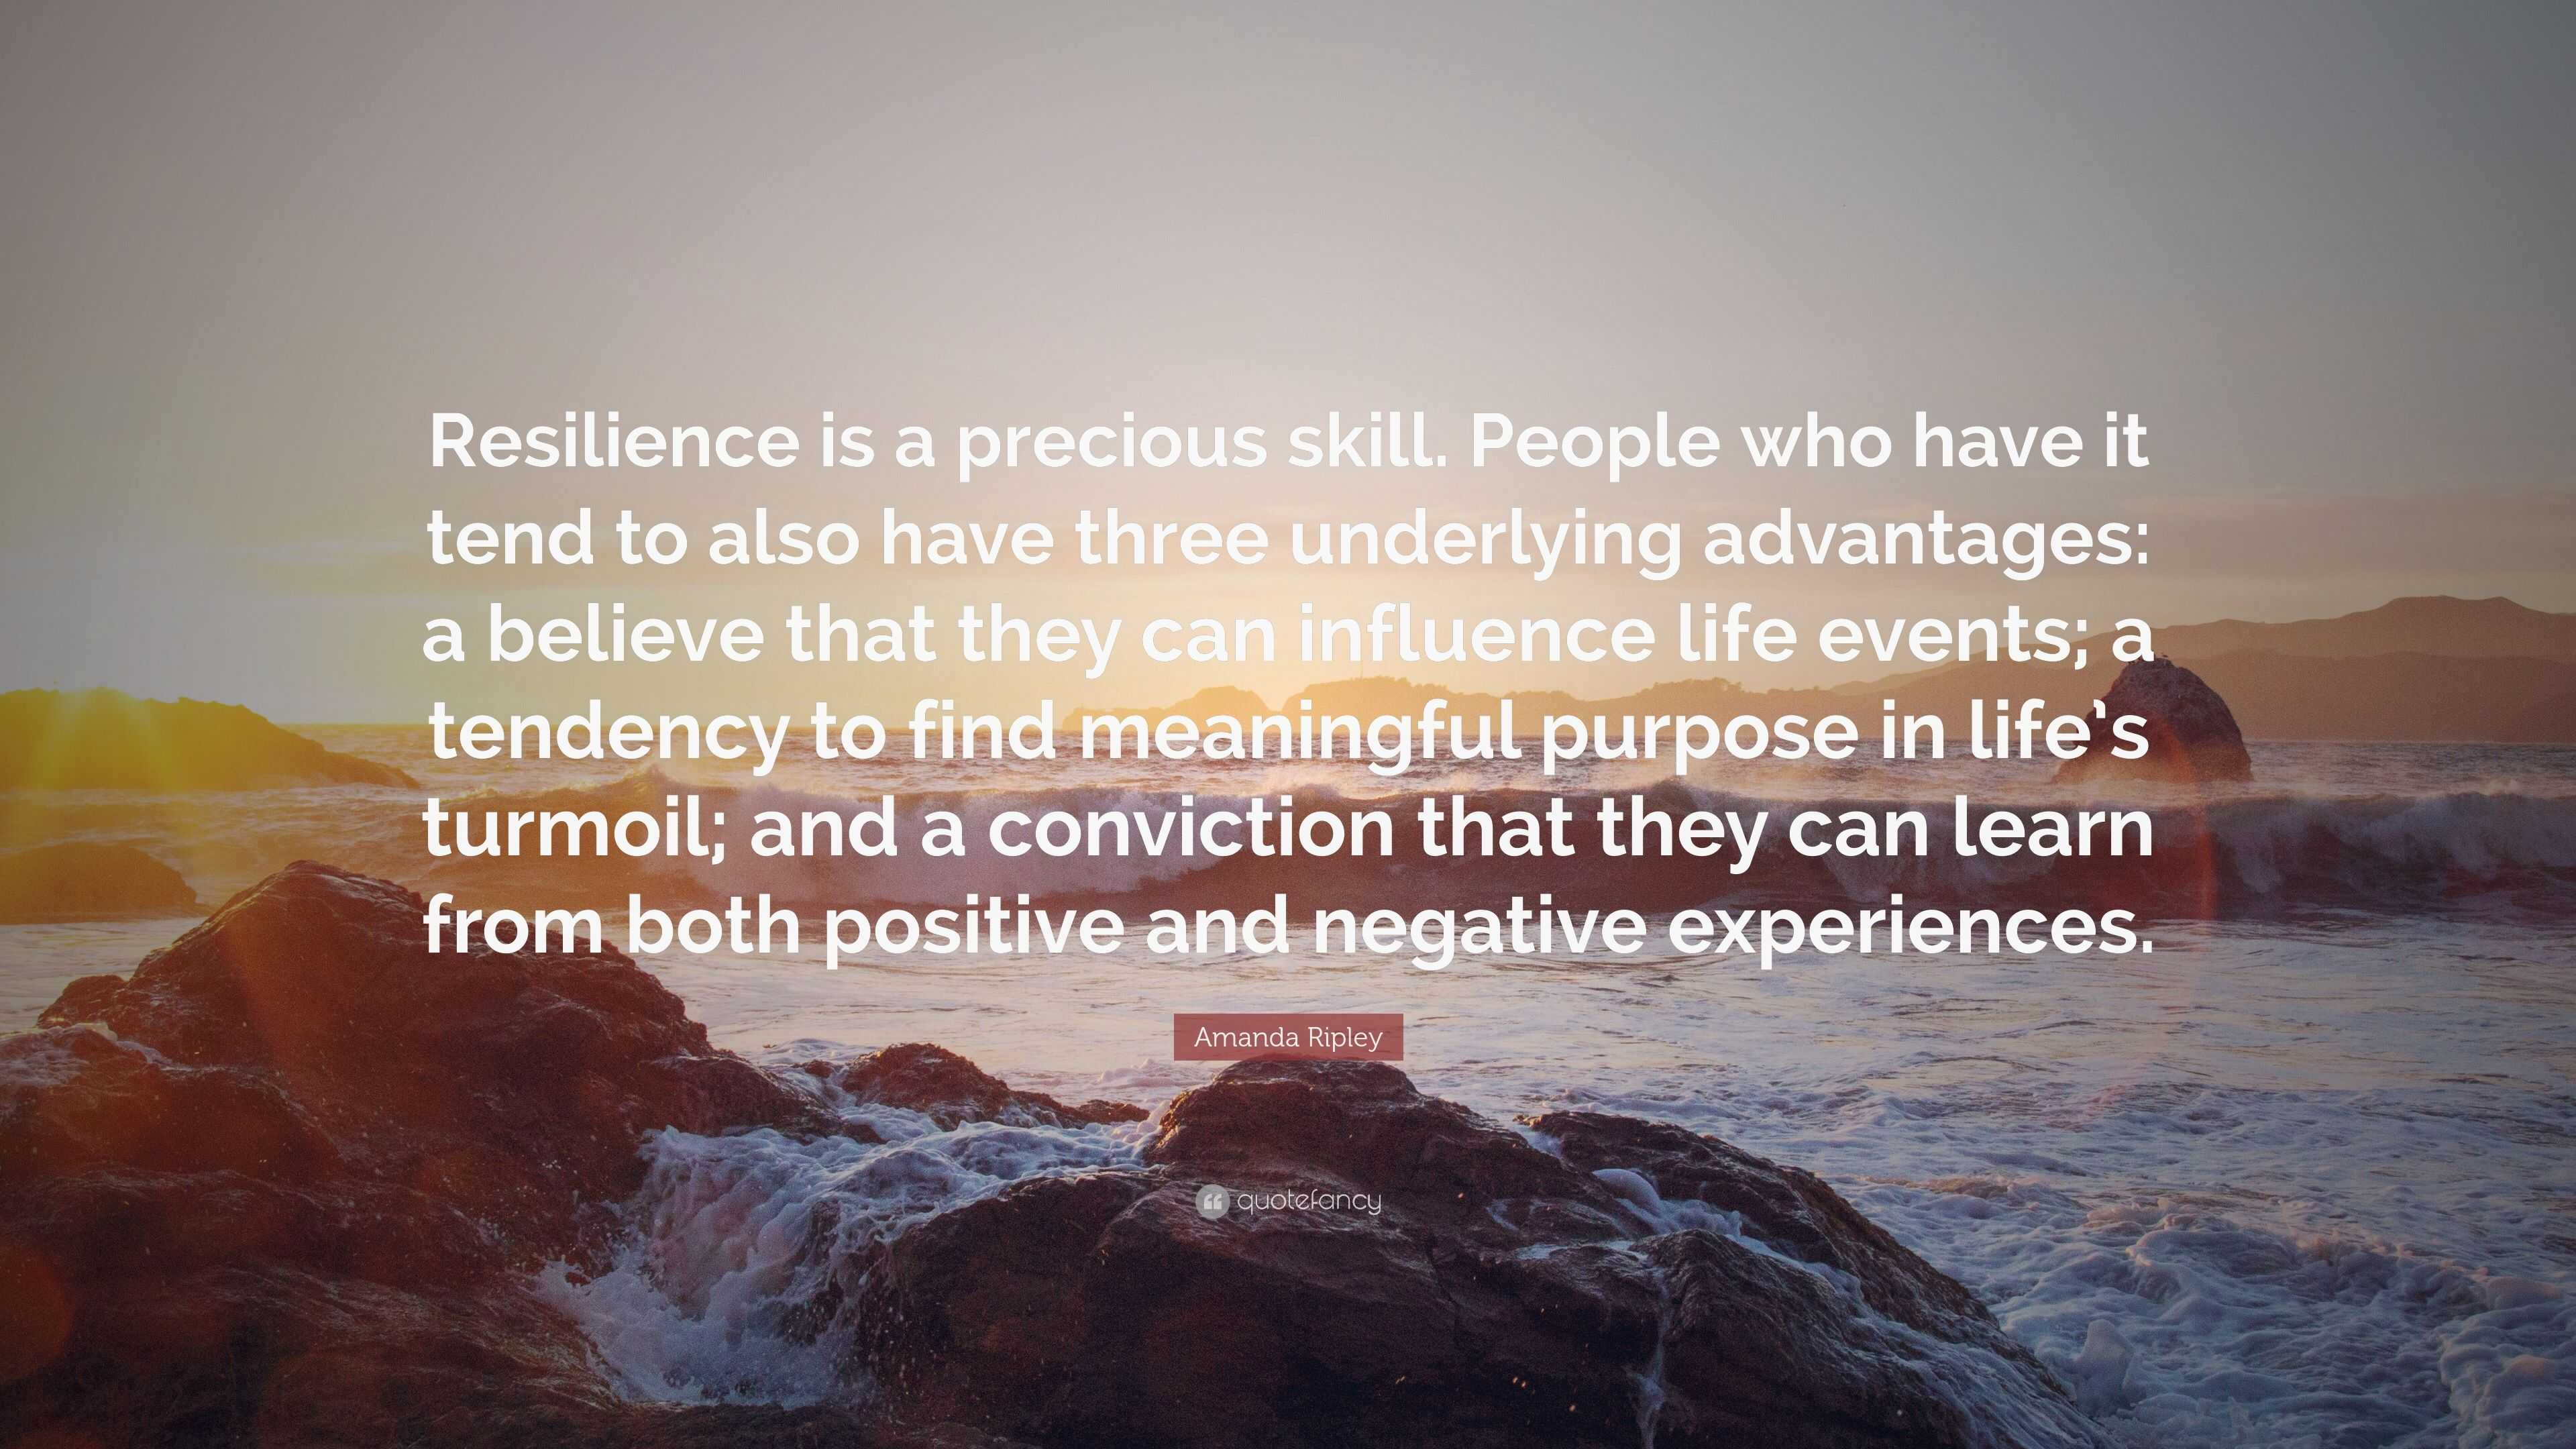 Amanda Ripley Quote “Resilience is a precious skill